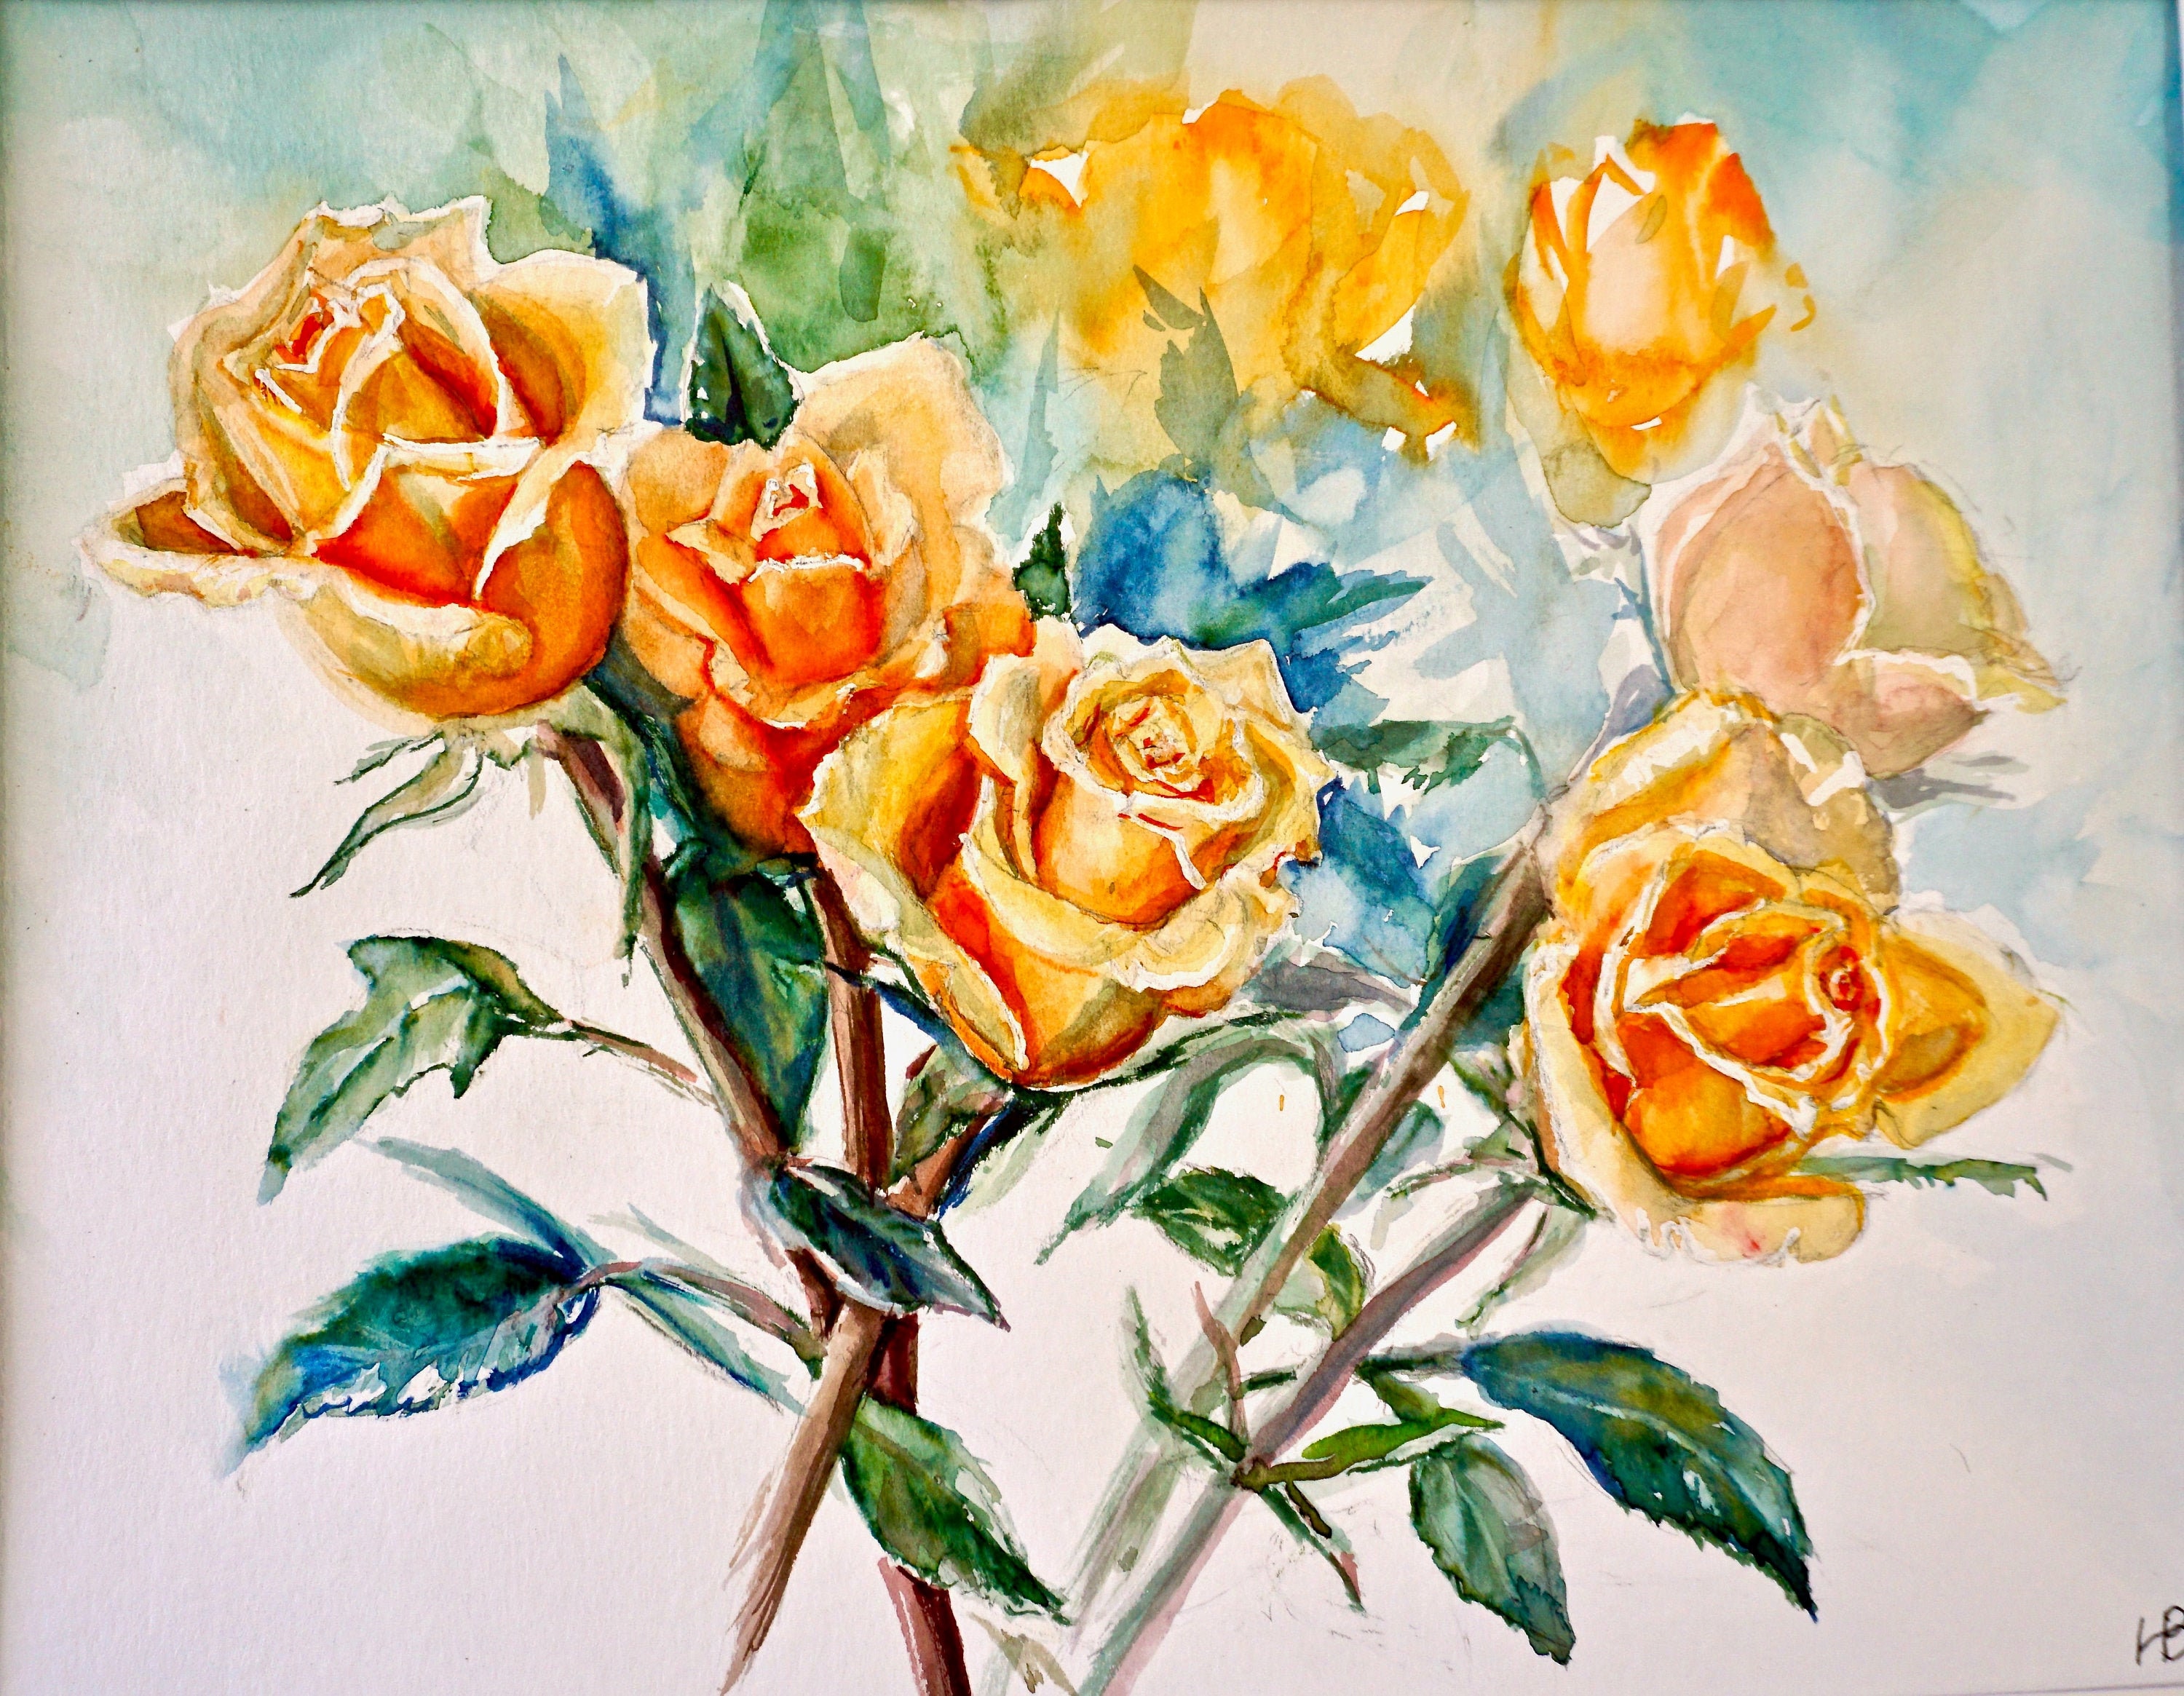 Yellow Roses Original Flower Watercolor Painting, Signed Floral